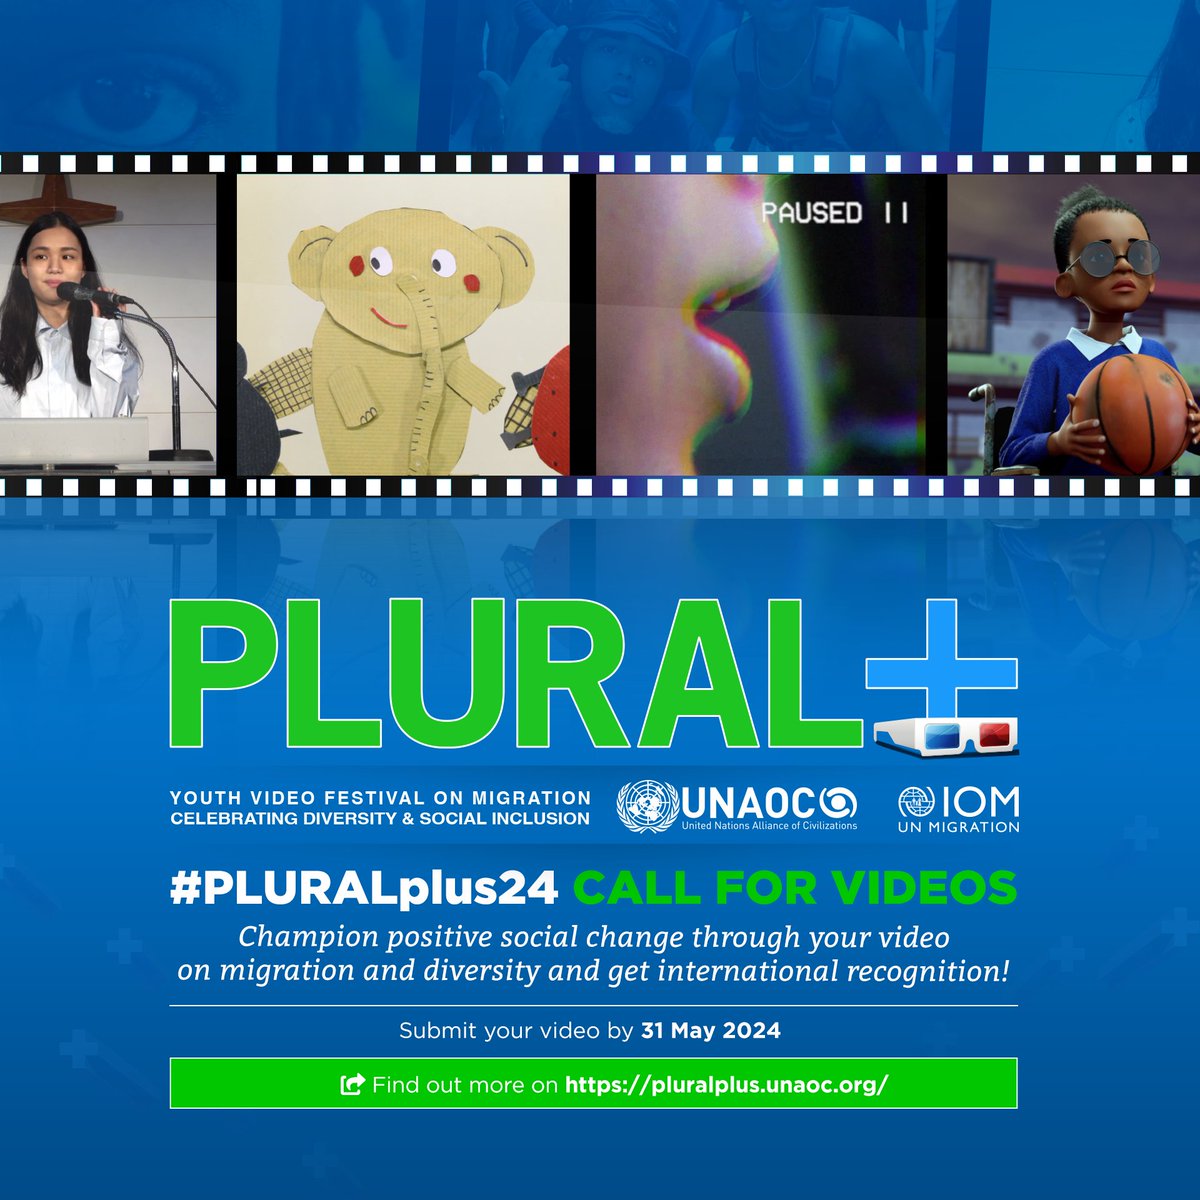 Are you a filmmaker between the ages of 12 - 25! Submit your videos to the PLURAL+ Youth Video Festival. Showcase your talent and perspectives on migration, diversity, and inclusion. Deadline: May 31, 2024. Visit pluralplus.unaoc.org. #PLURALplus24'